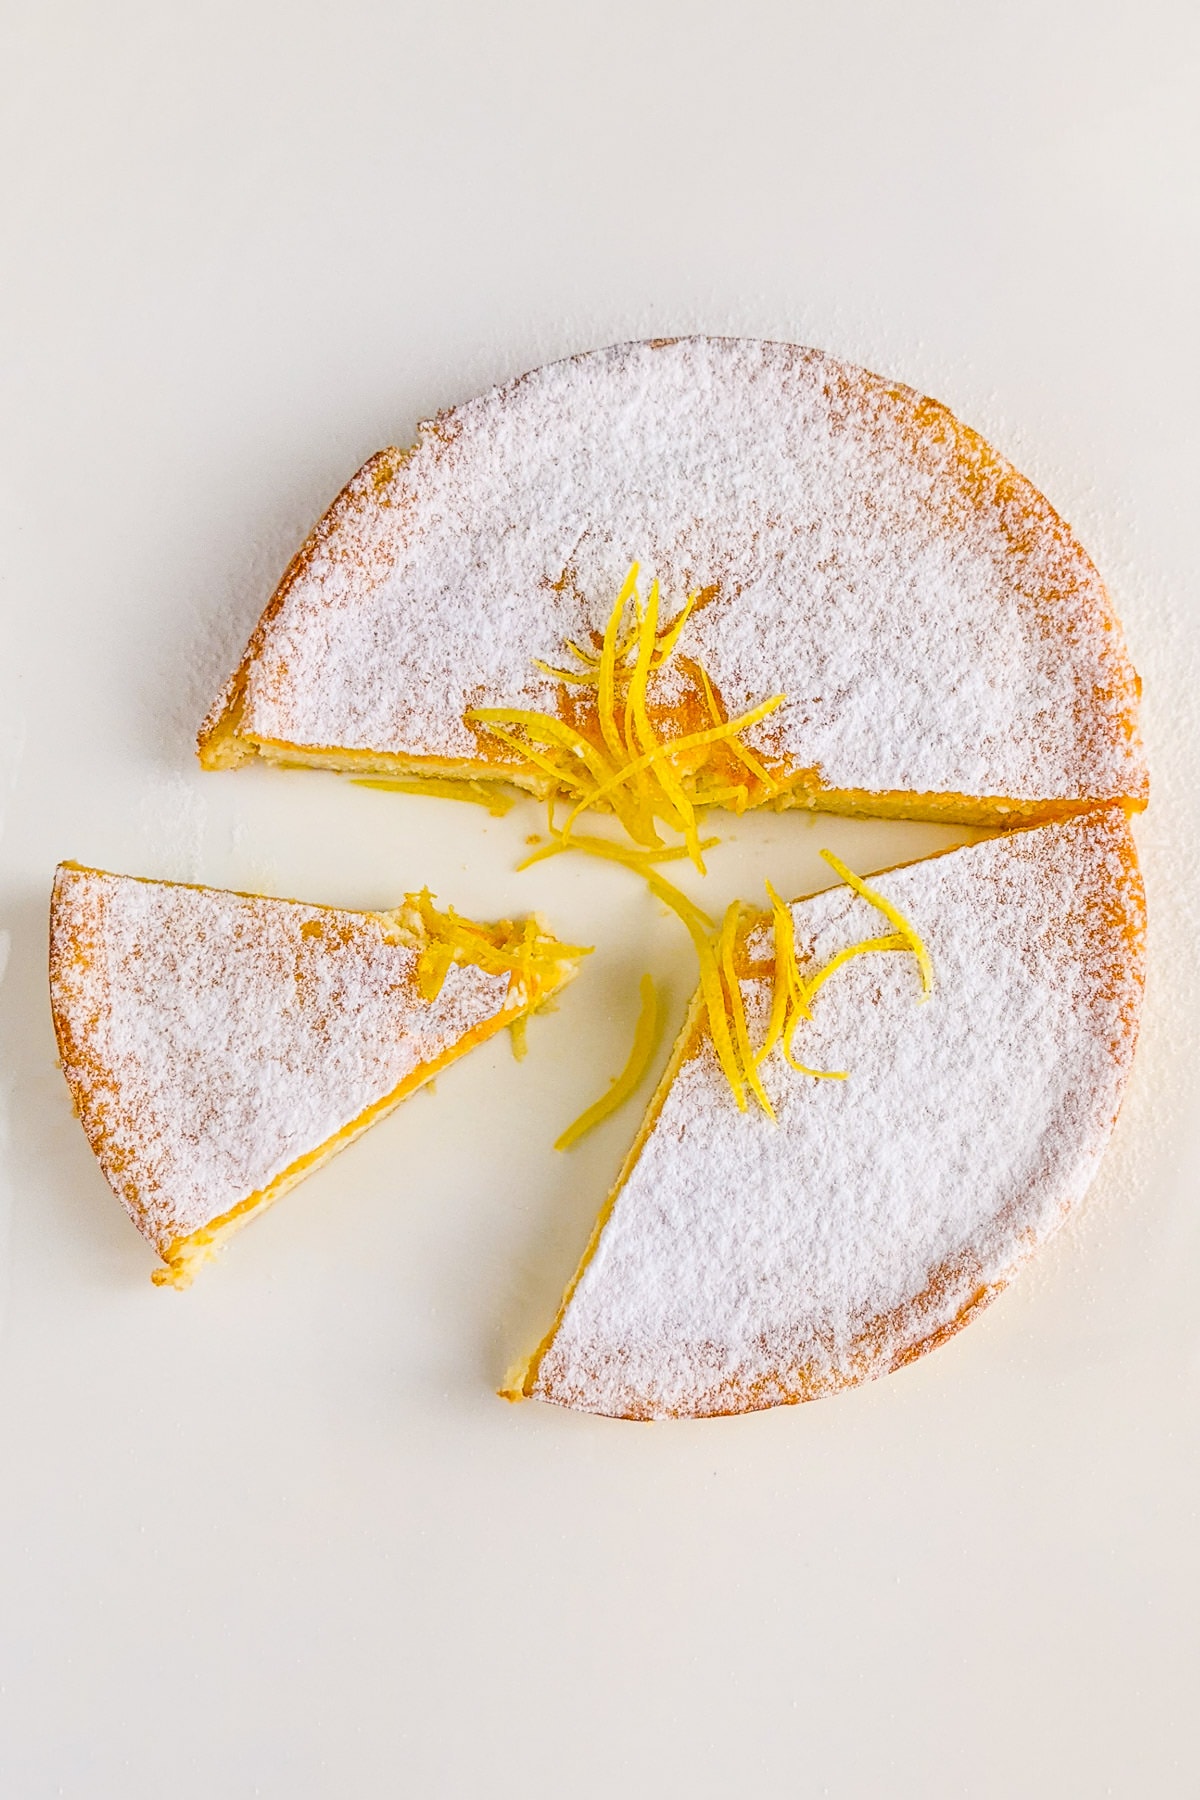 Top view of Ricotta Cheesecake powdered with sugar and lemon peel slices.